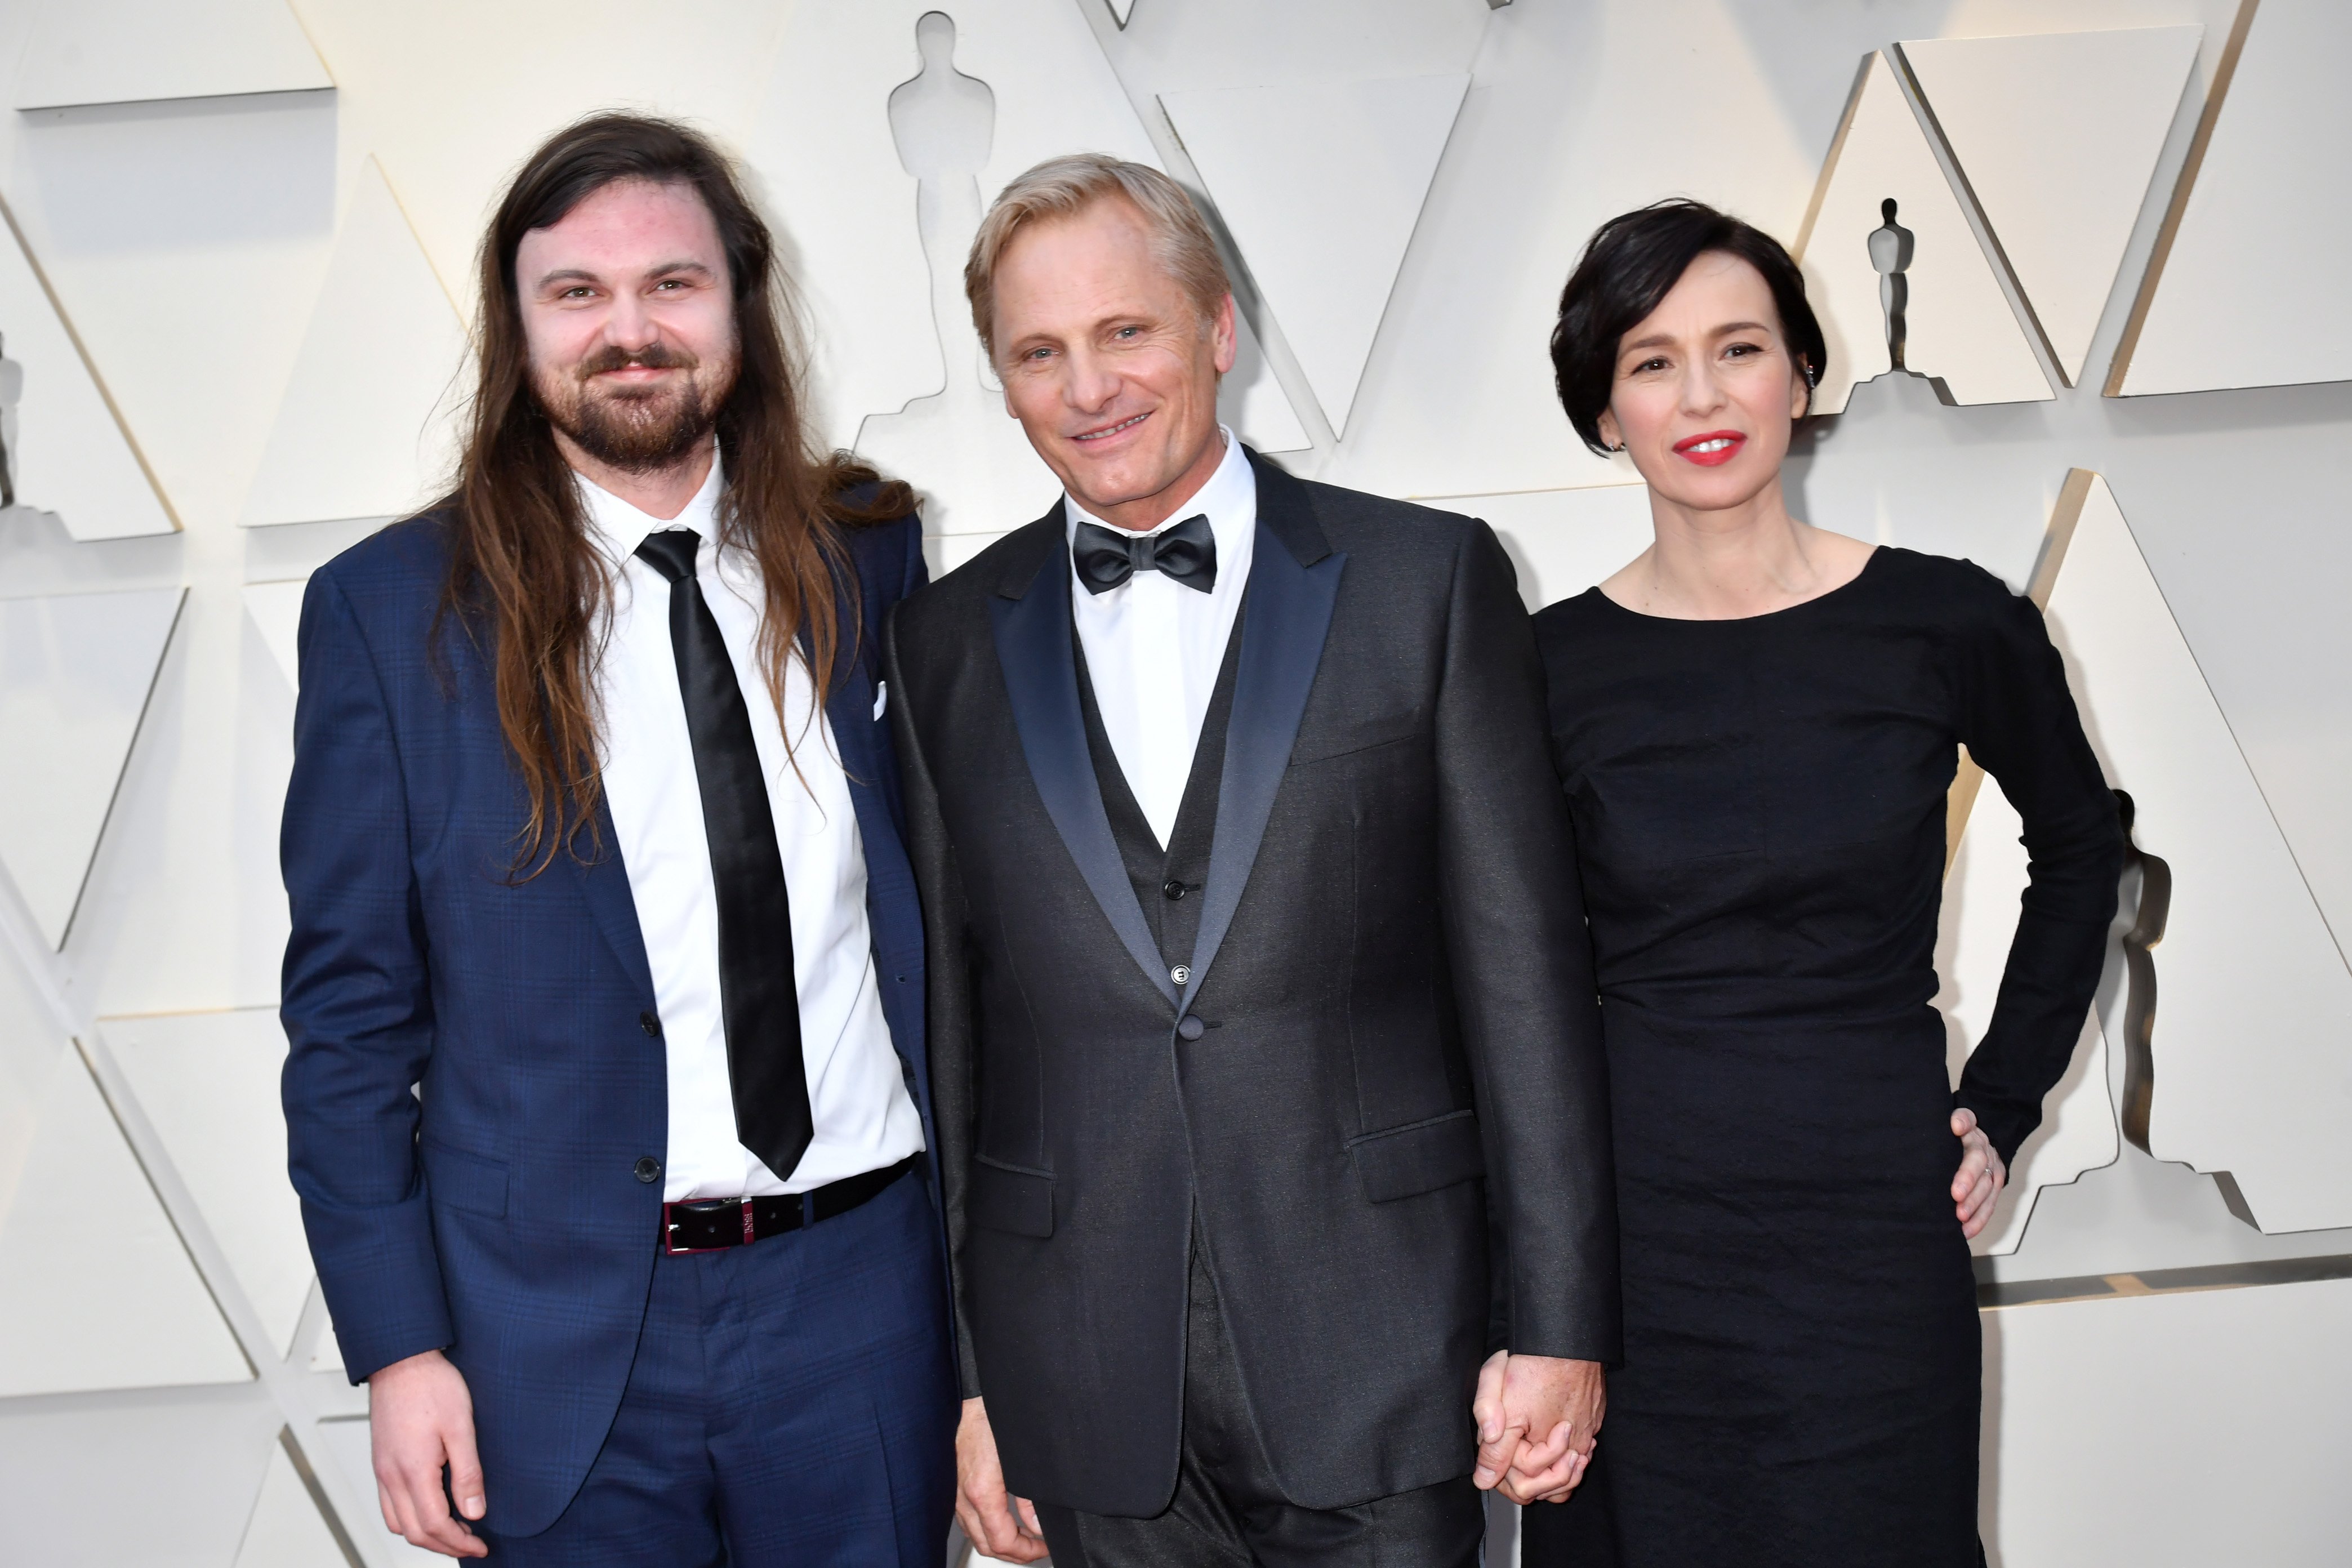 Henry Mortensen, Viggo Mortensen, and Ariadna Gil attend the 91st Annual Academy Awards on February 24, 2019, in Hollywood, California. | Source: Getty Images